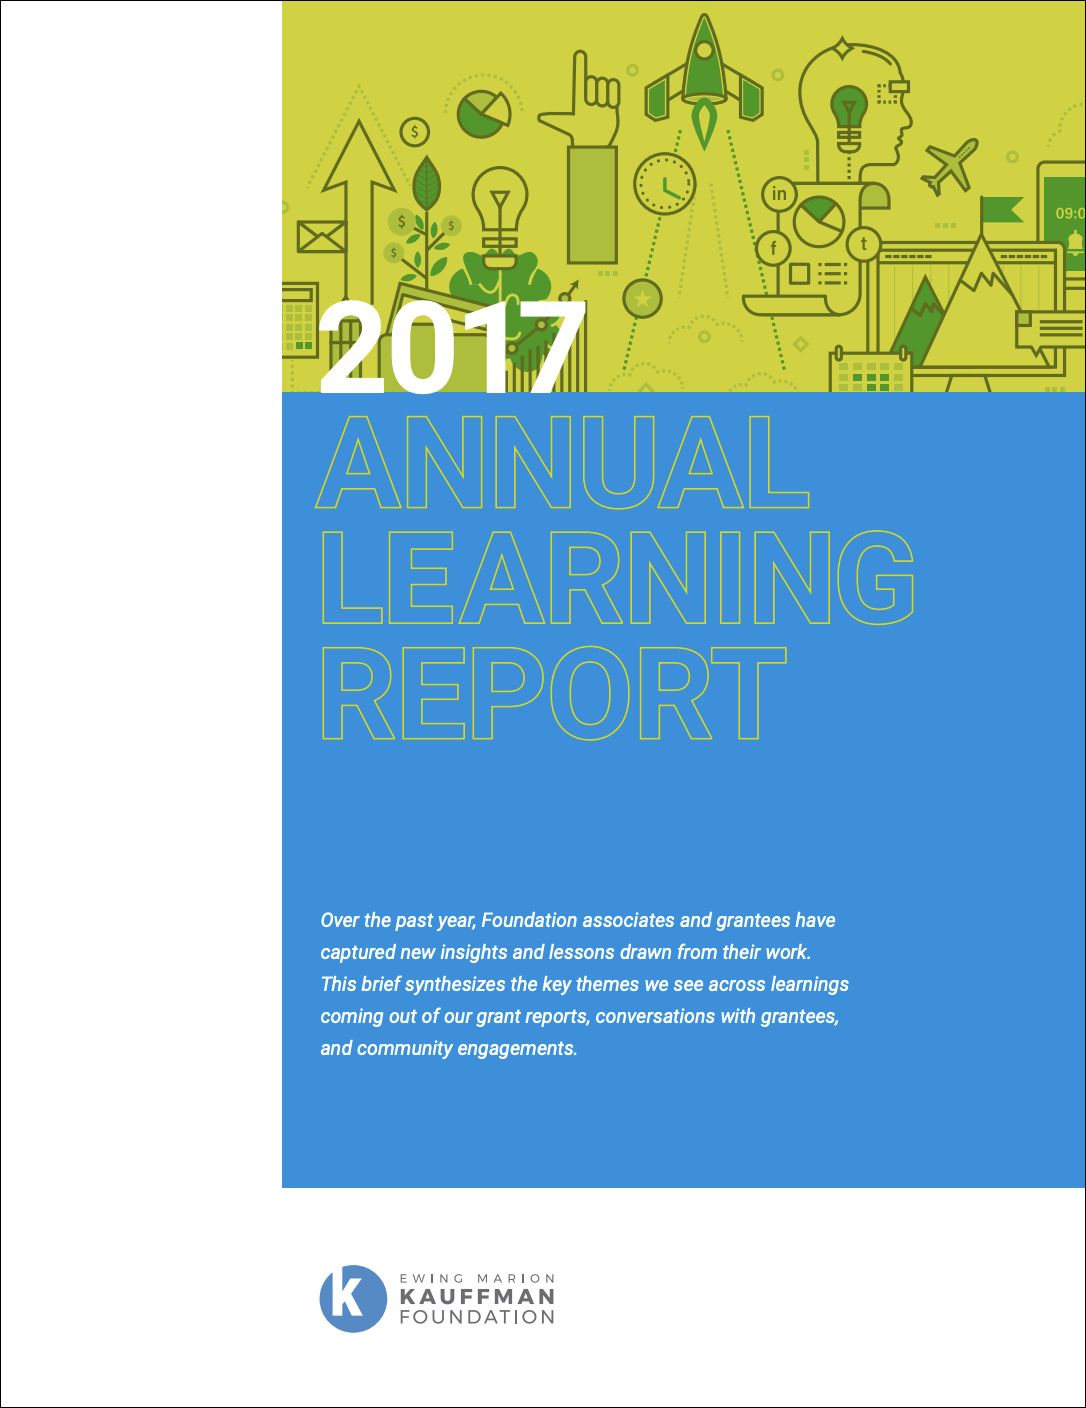 Kauffman Foundation Annual Learning Report 2017